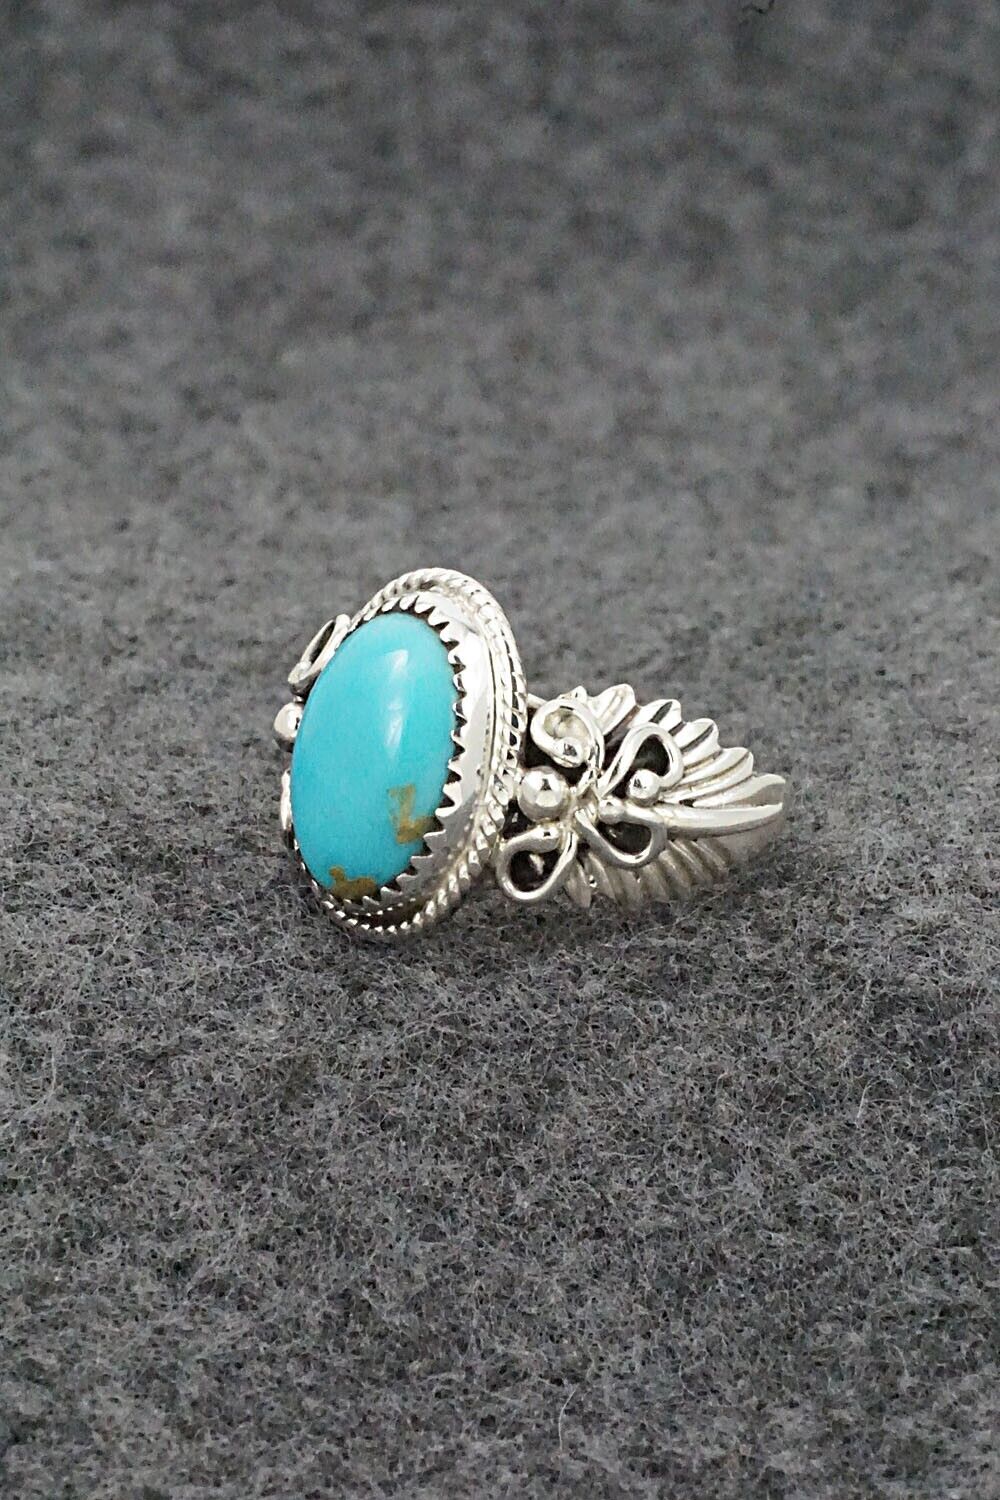 Turquoise & Sterling Silver Ring - Jeannette Saunders - Size 7.5